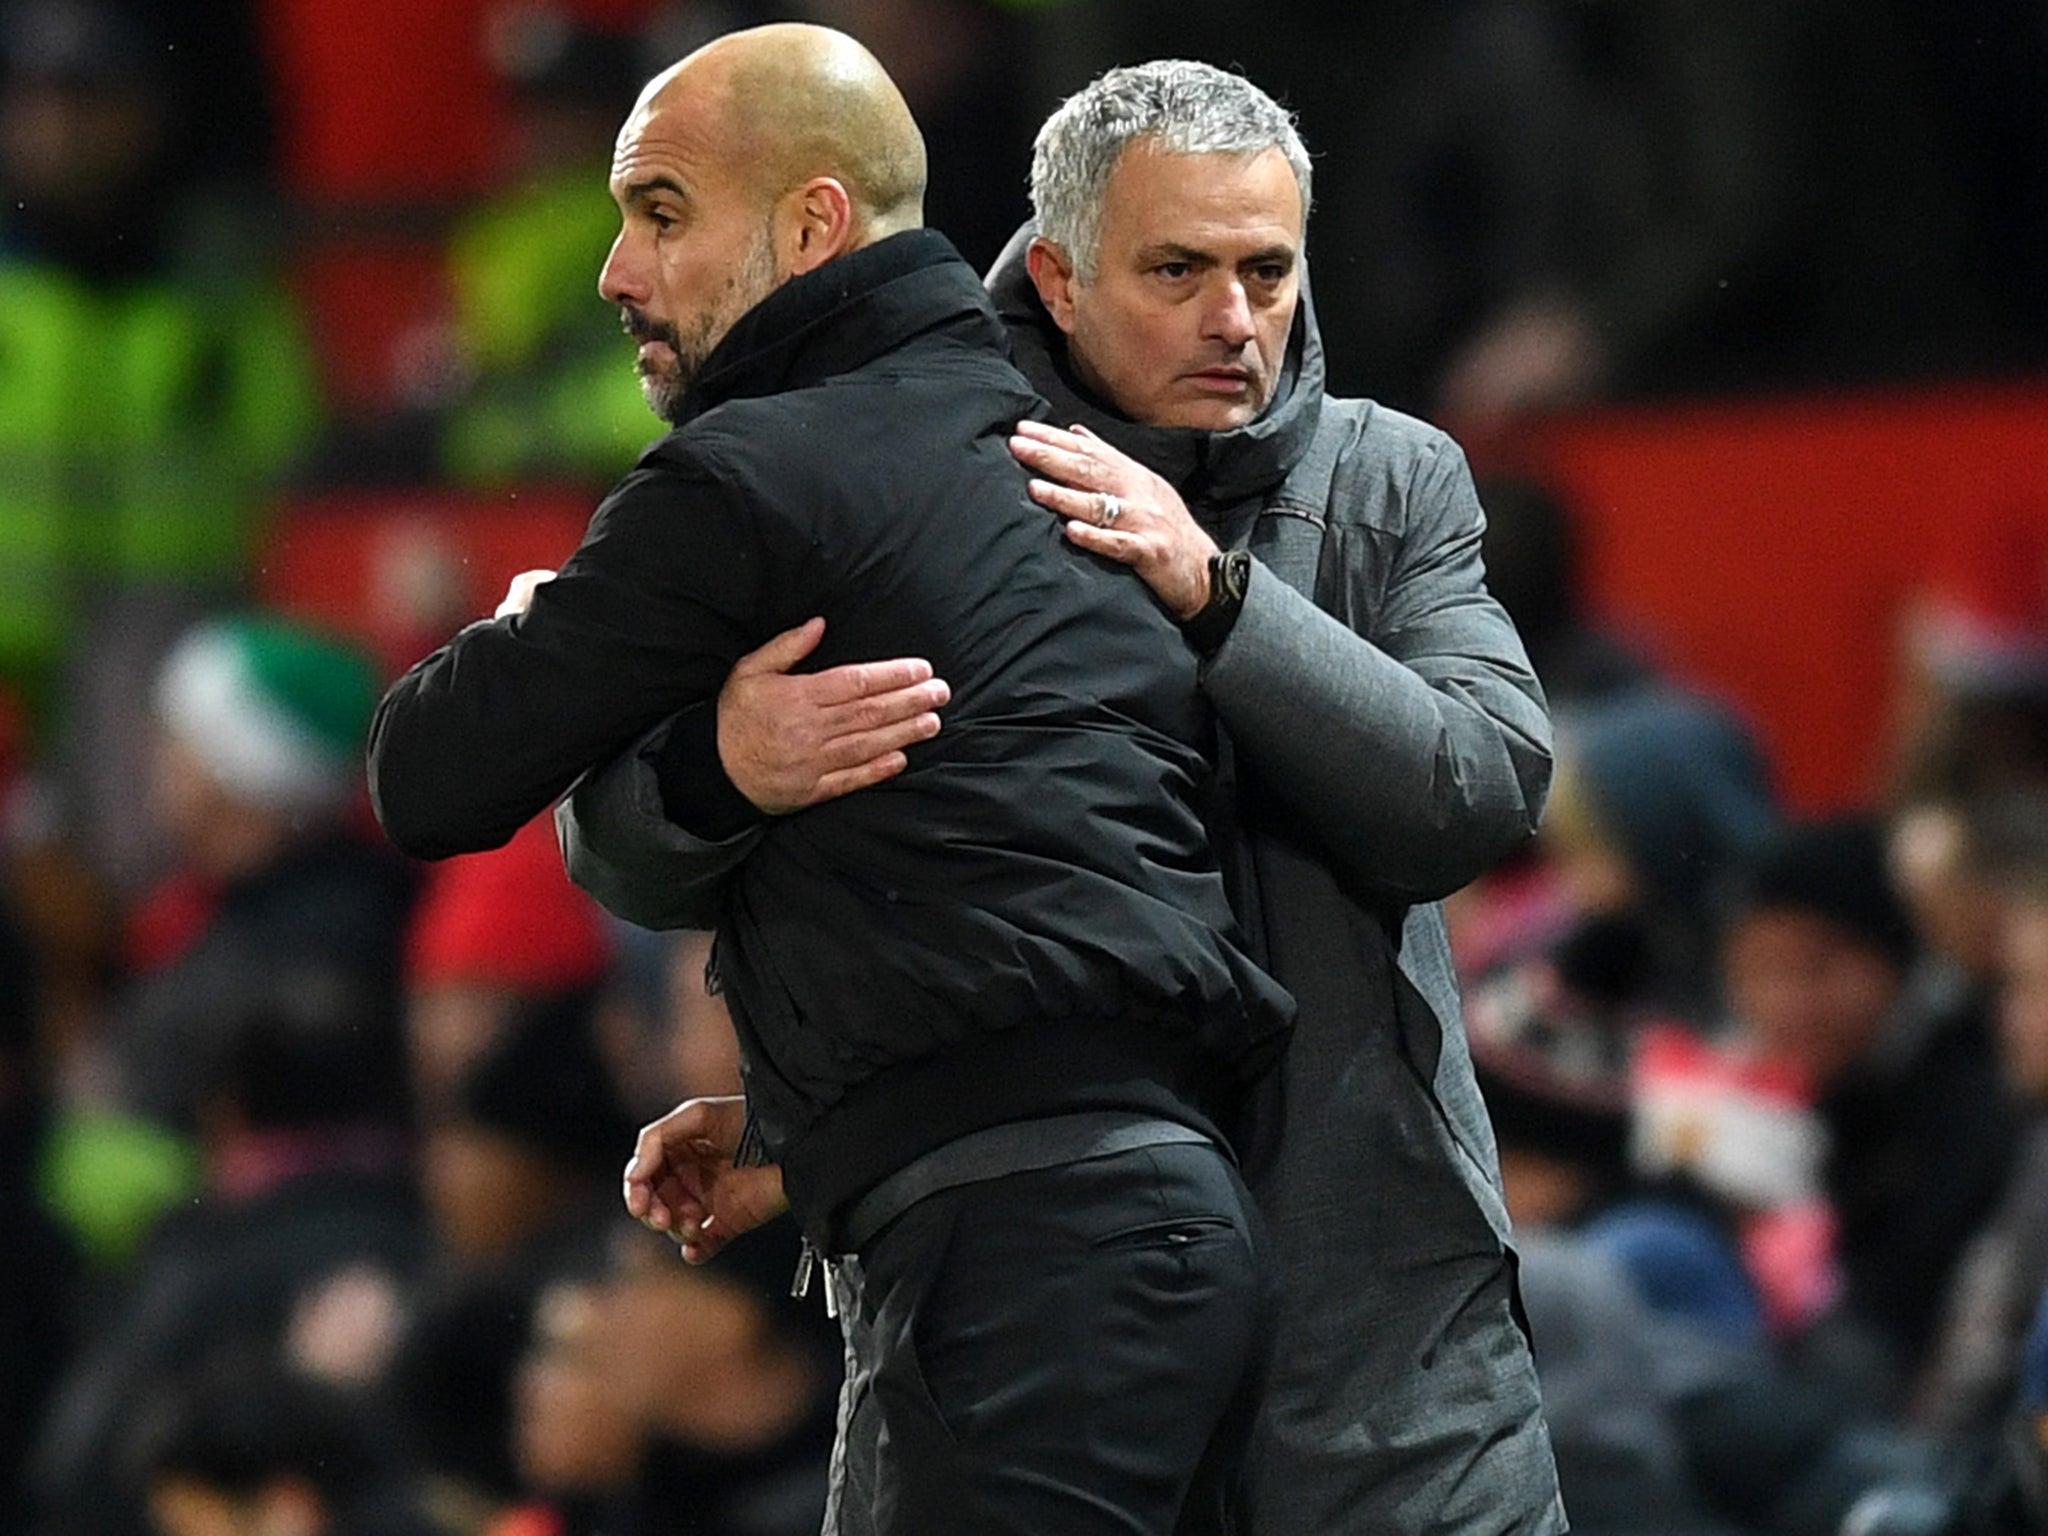 City and United were involved in a post-derby fracas after Sunday's encounter